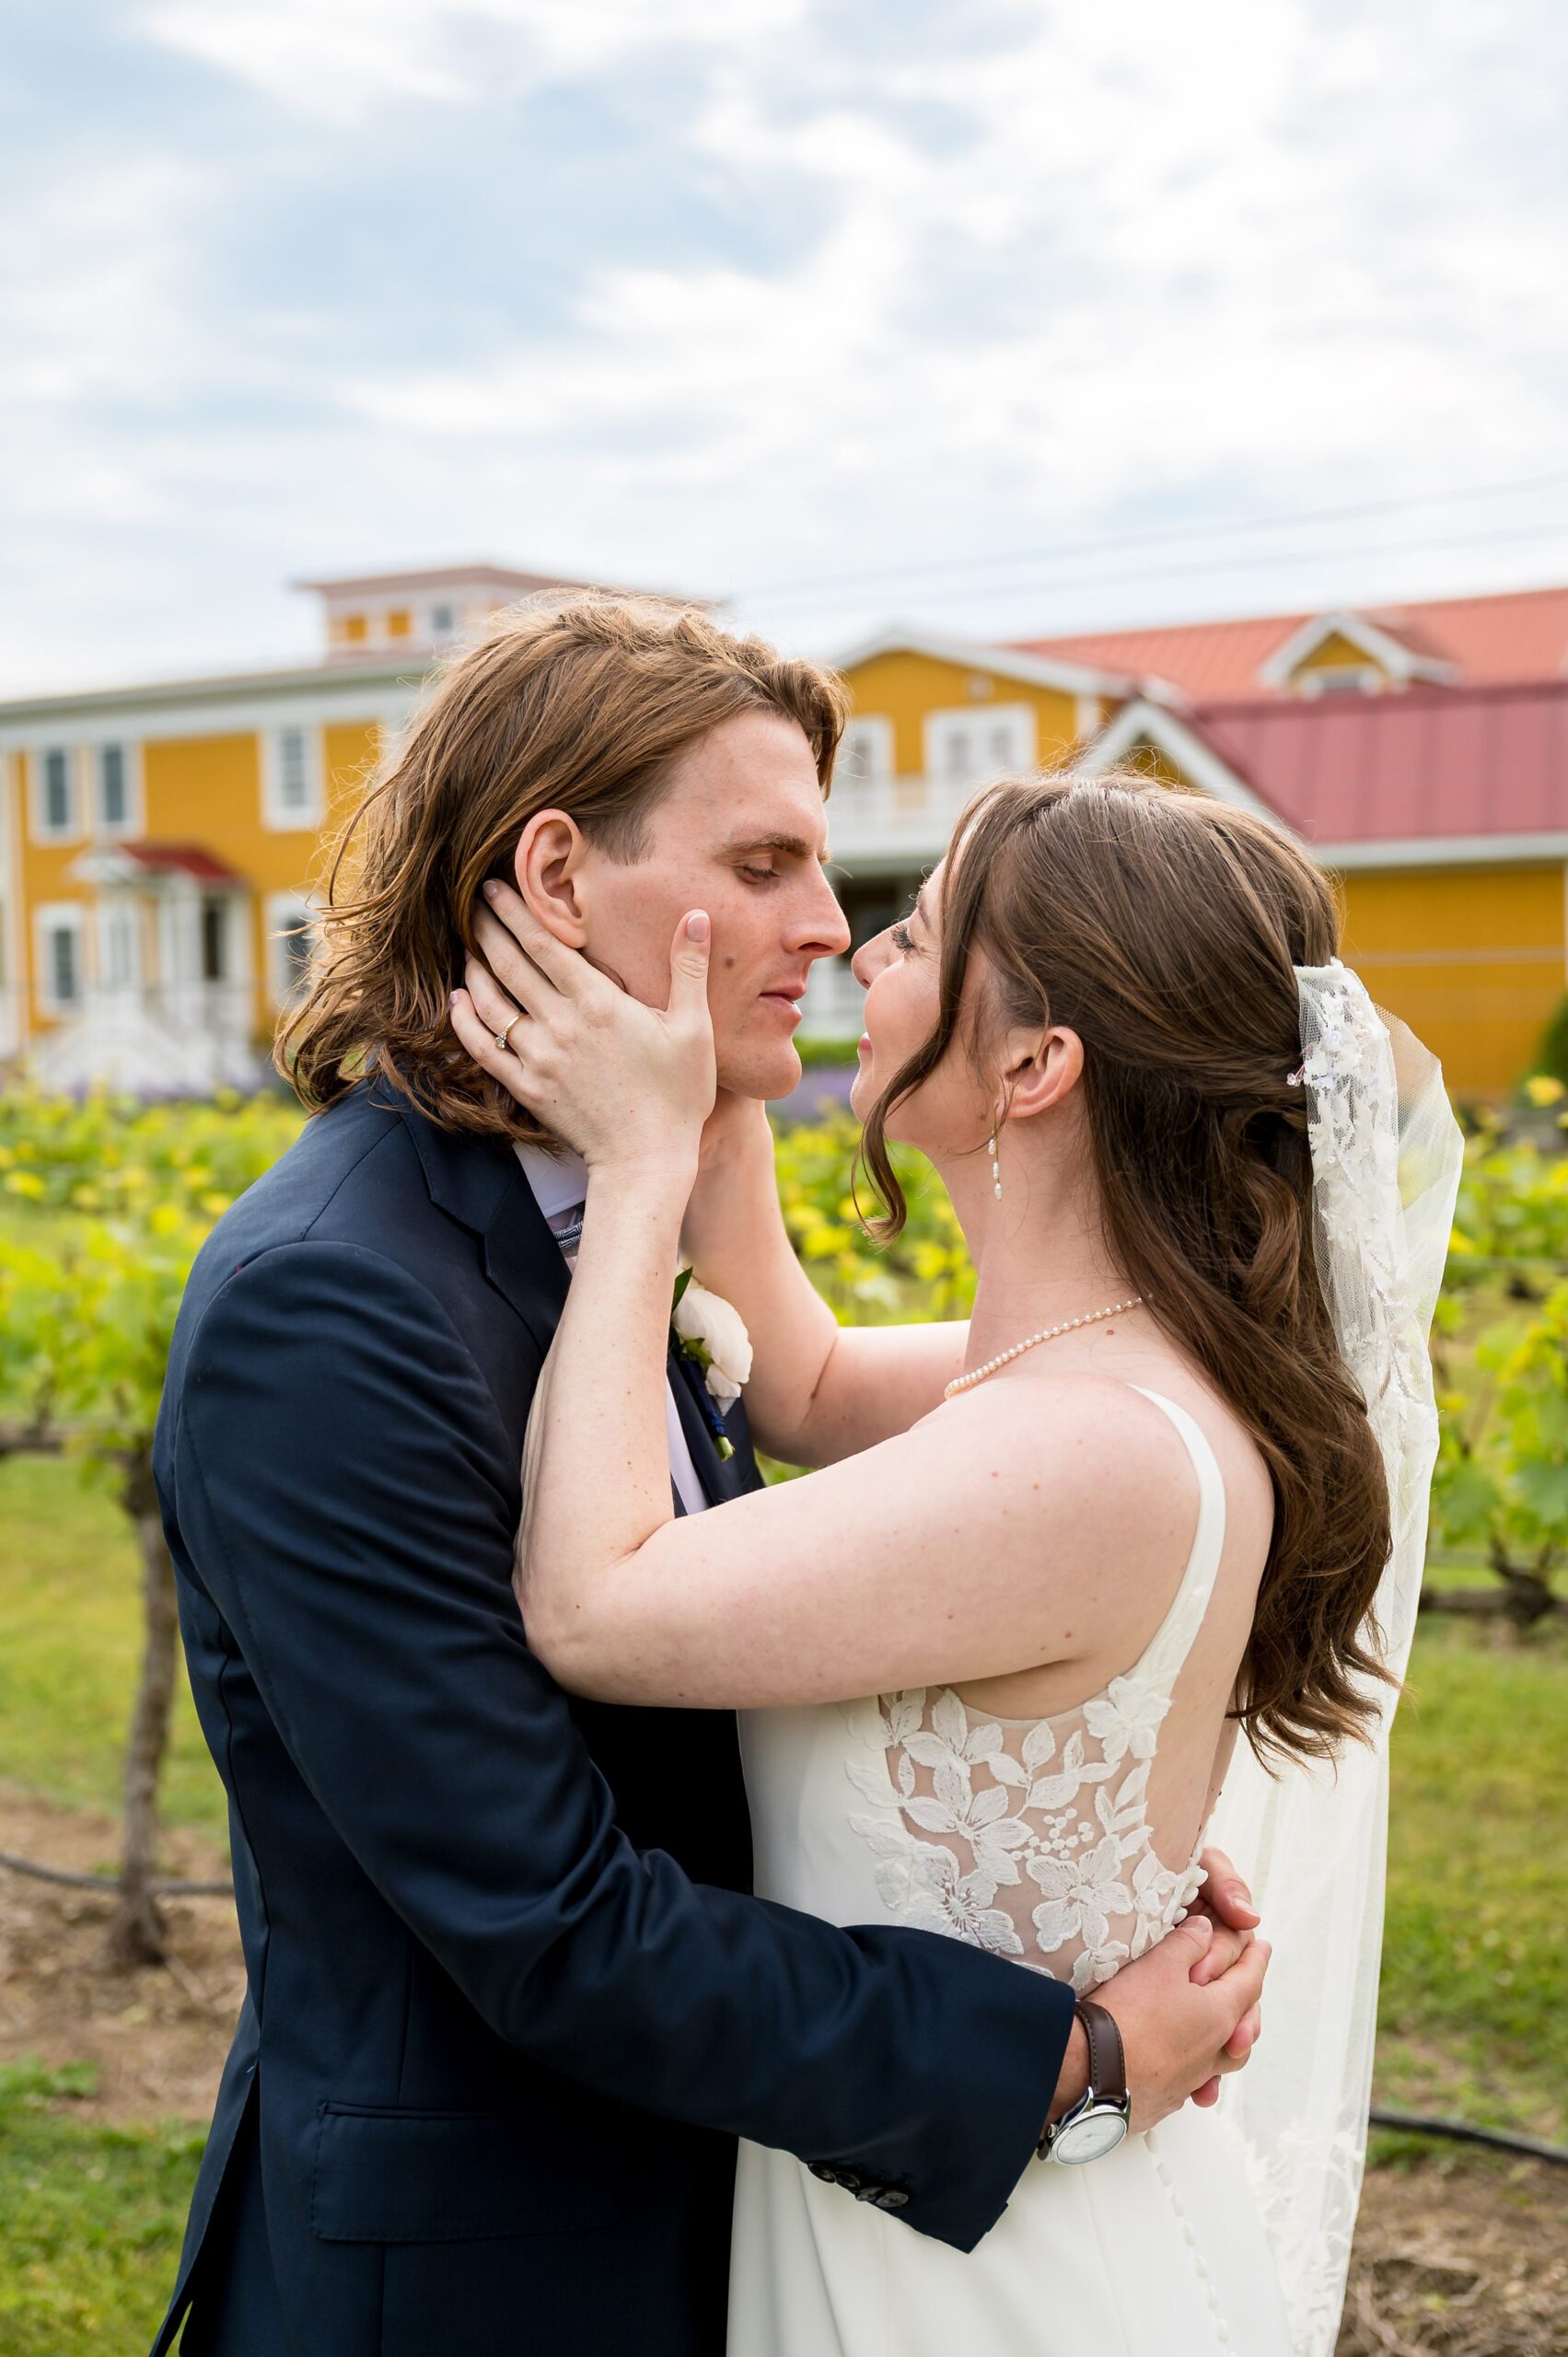 A bride and groom share an intimate moment, standing close and touching foreheads, against the backdrop of a building and greenery.